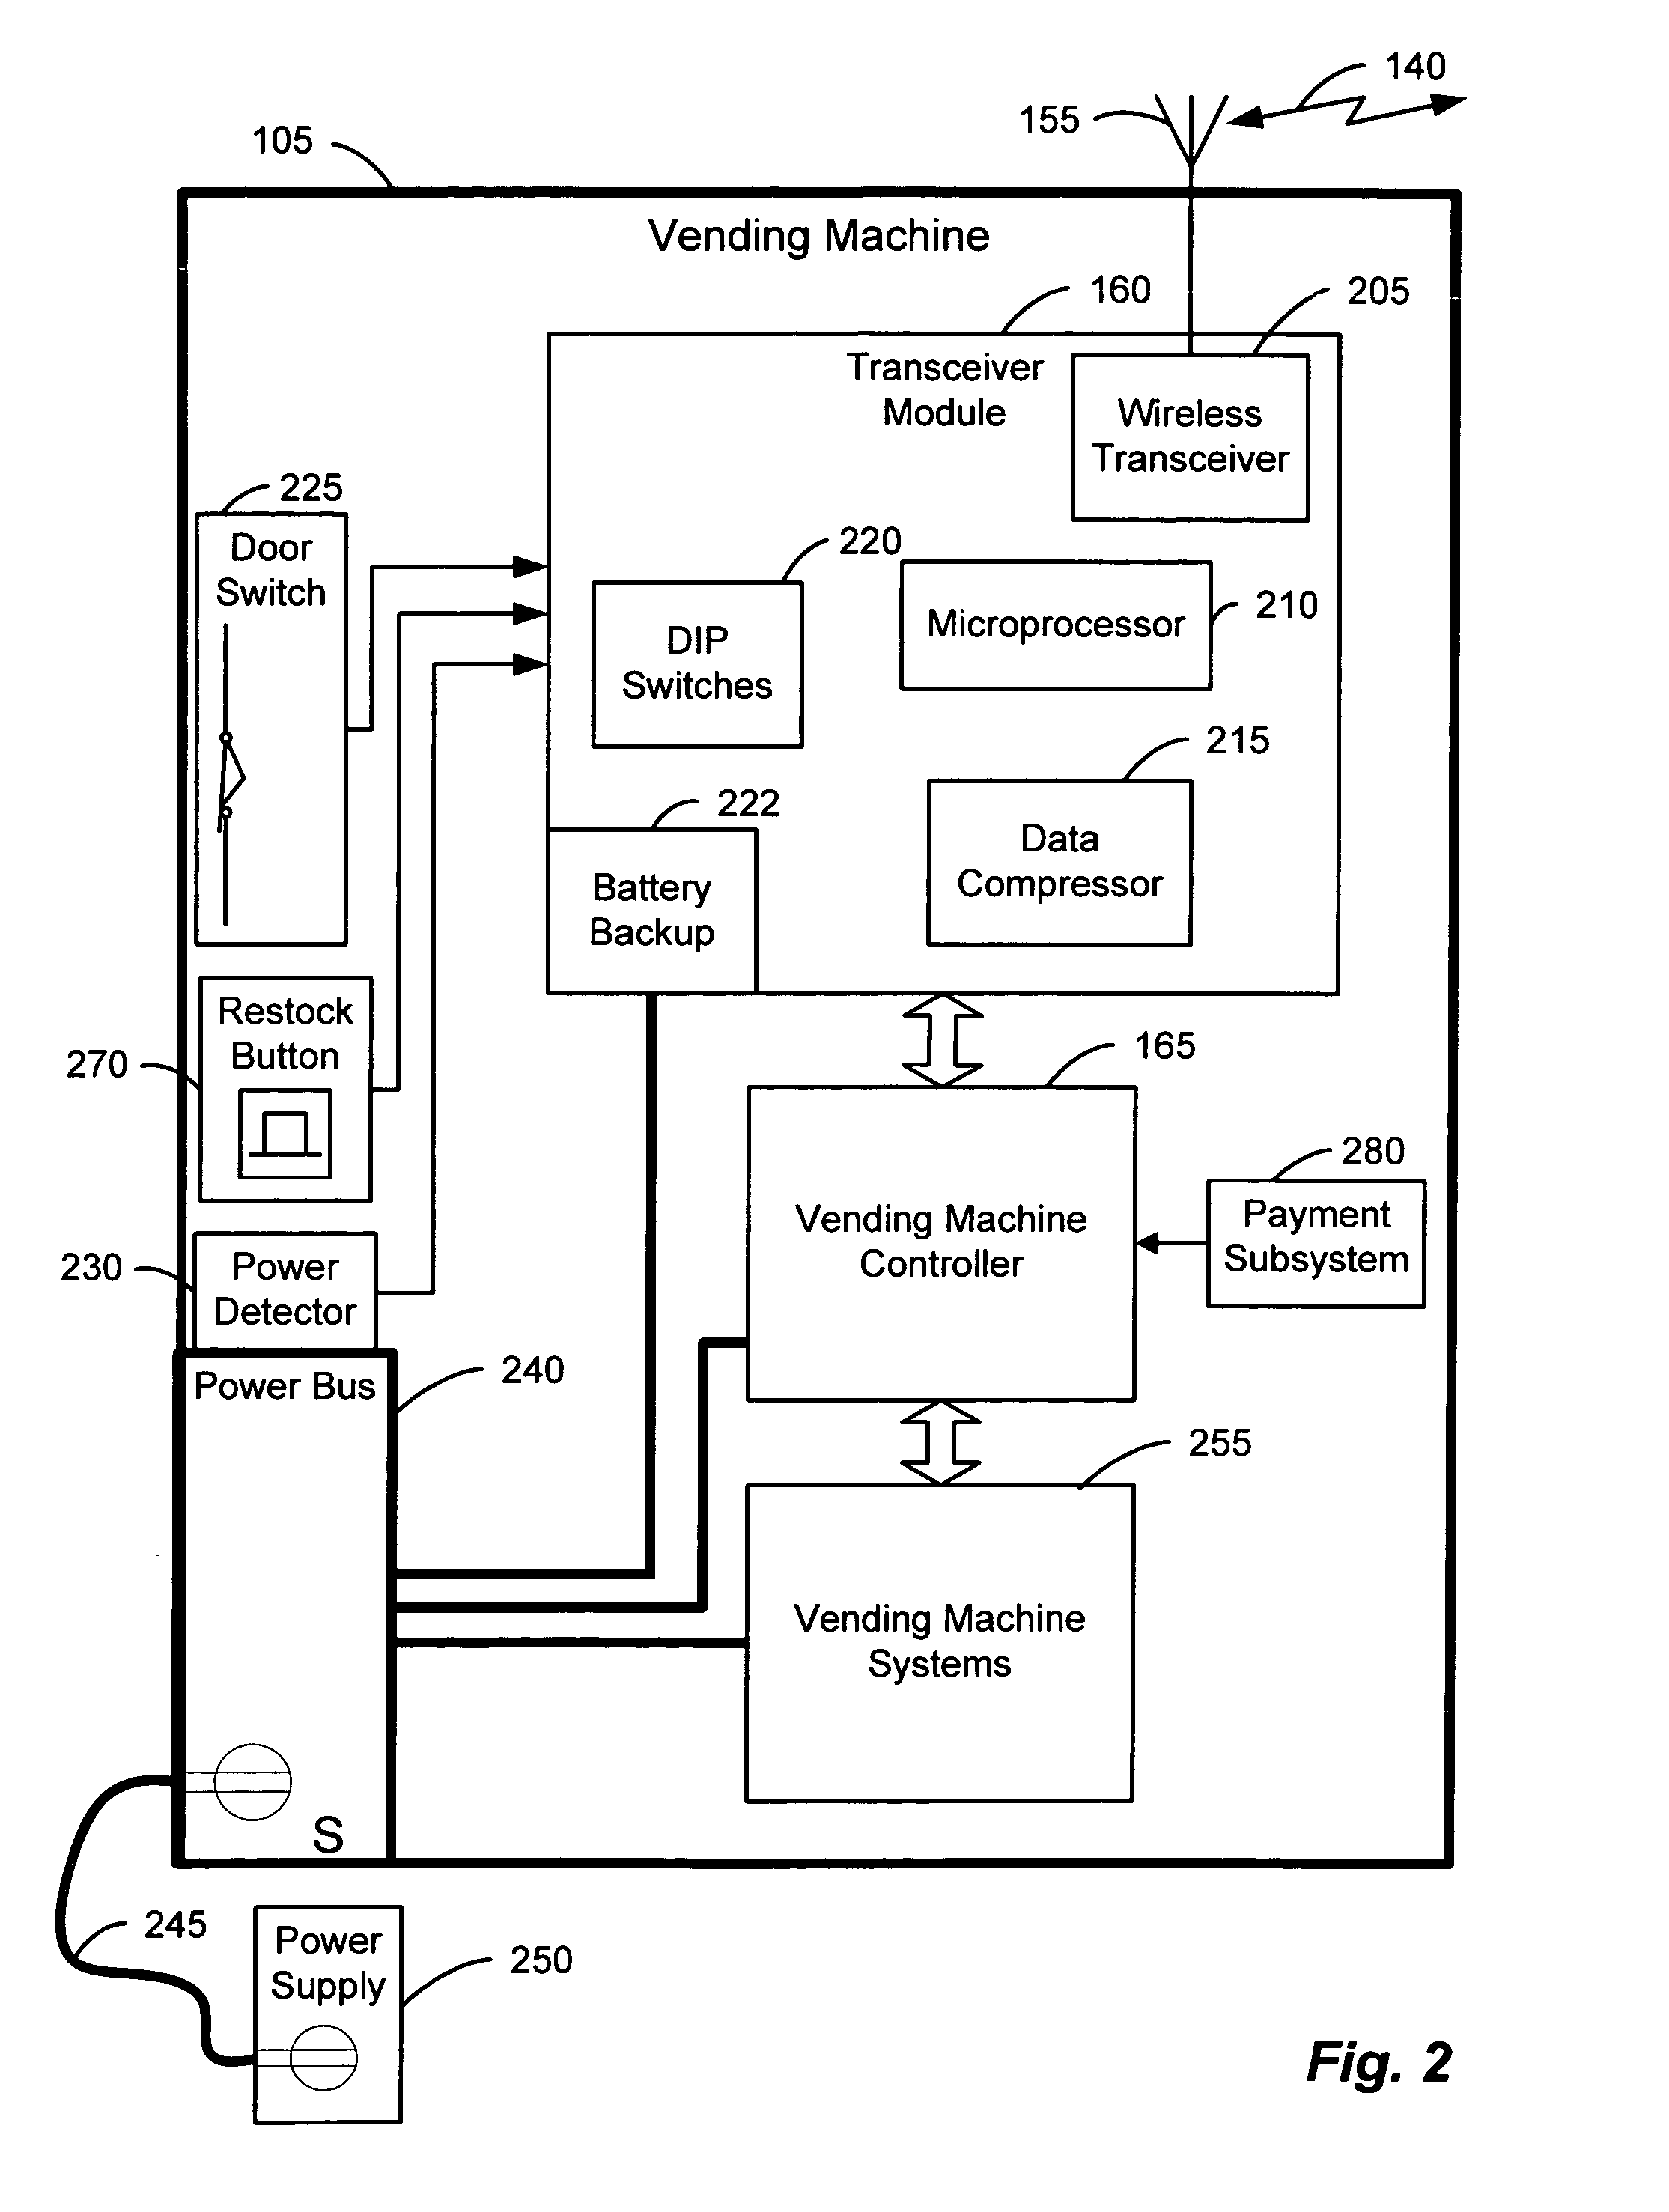 Method and system for refining vending operations based on wireless data